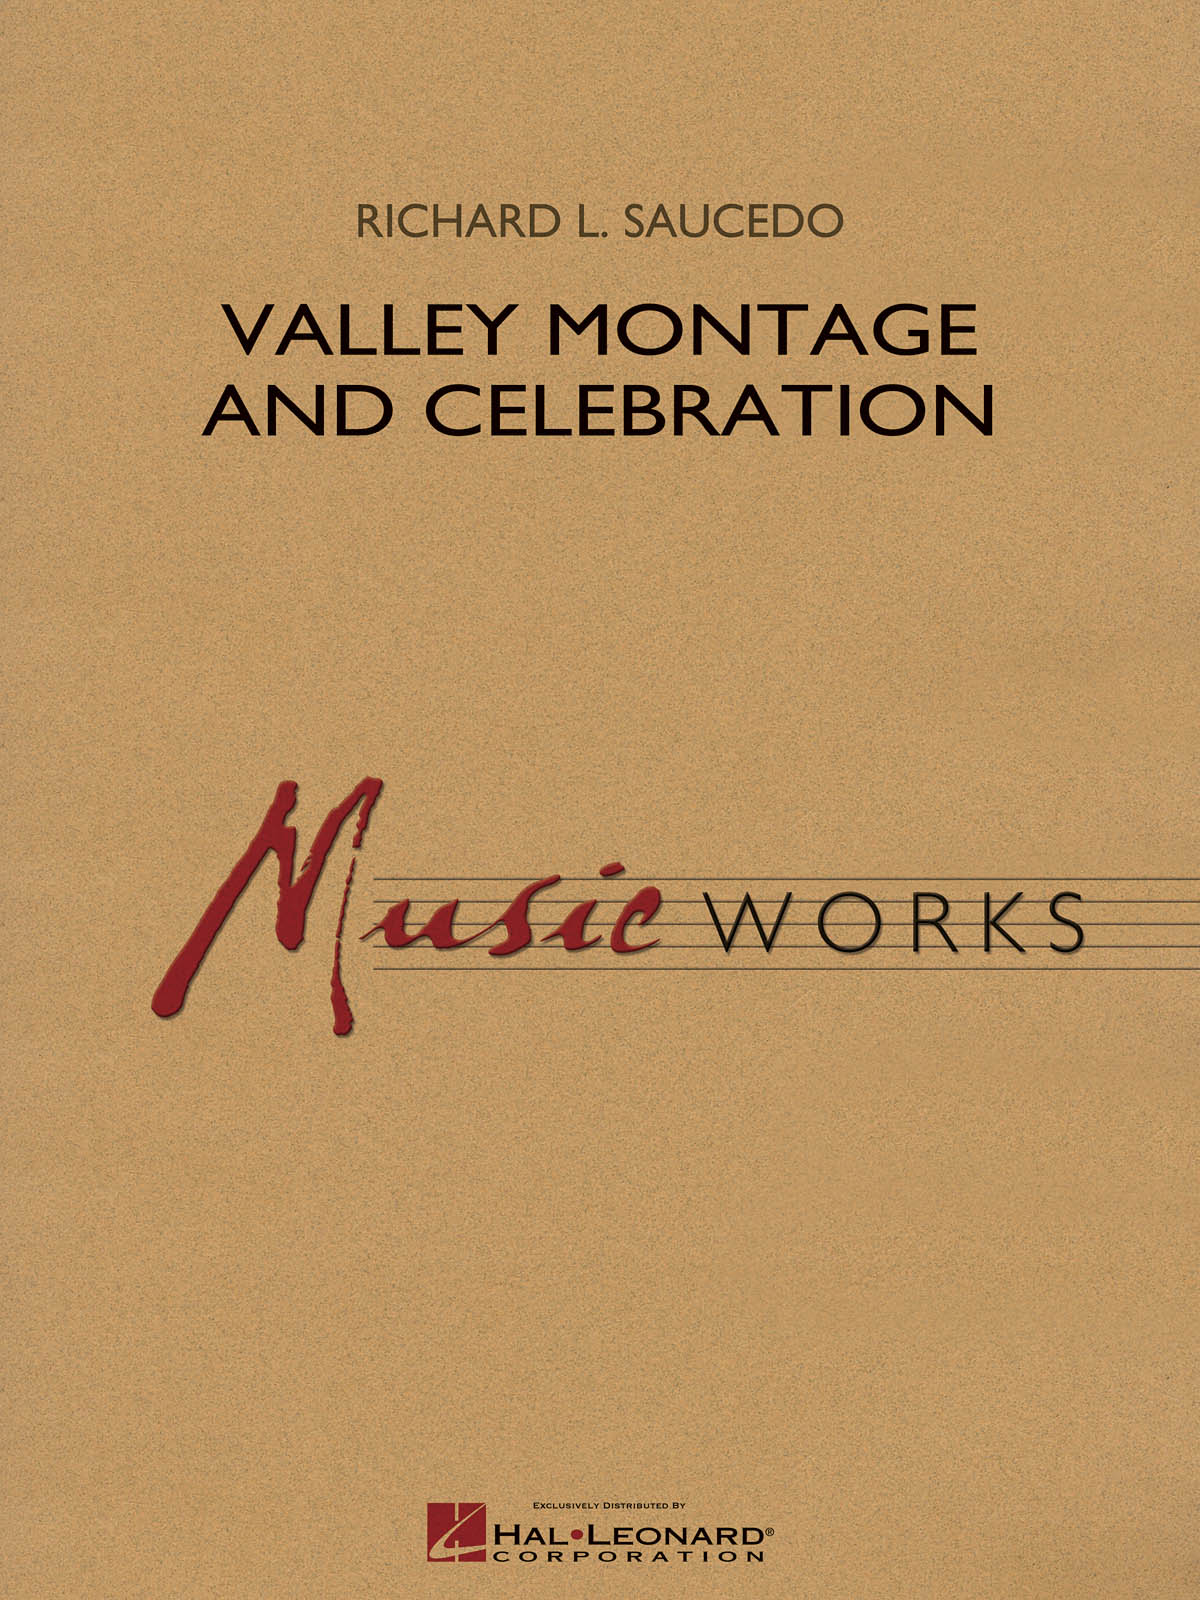 Valley Montage and Celebration